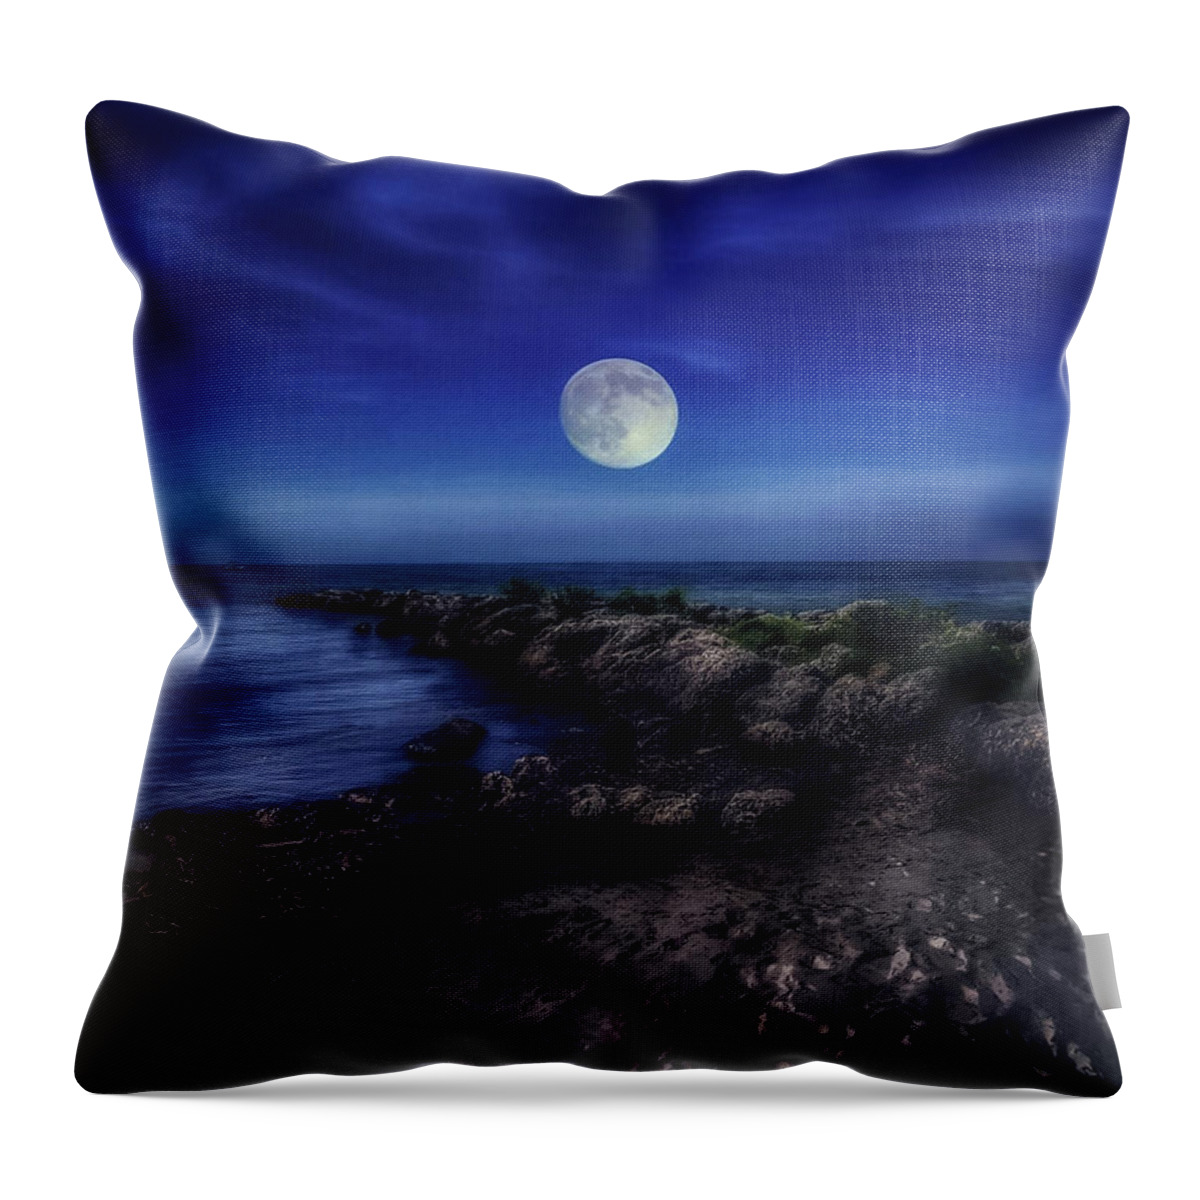 Moon Throw Pillow featuring the photograph Key West Moonrise by Brenda Wilcox aka Wildeyed n Wicked